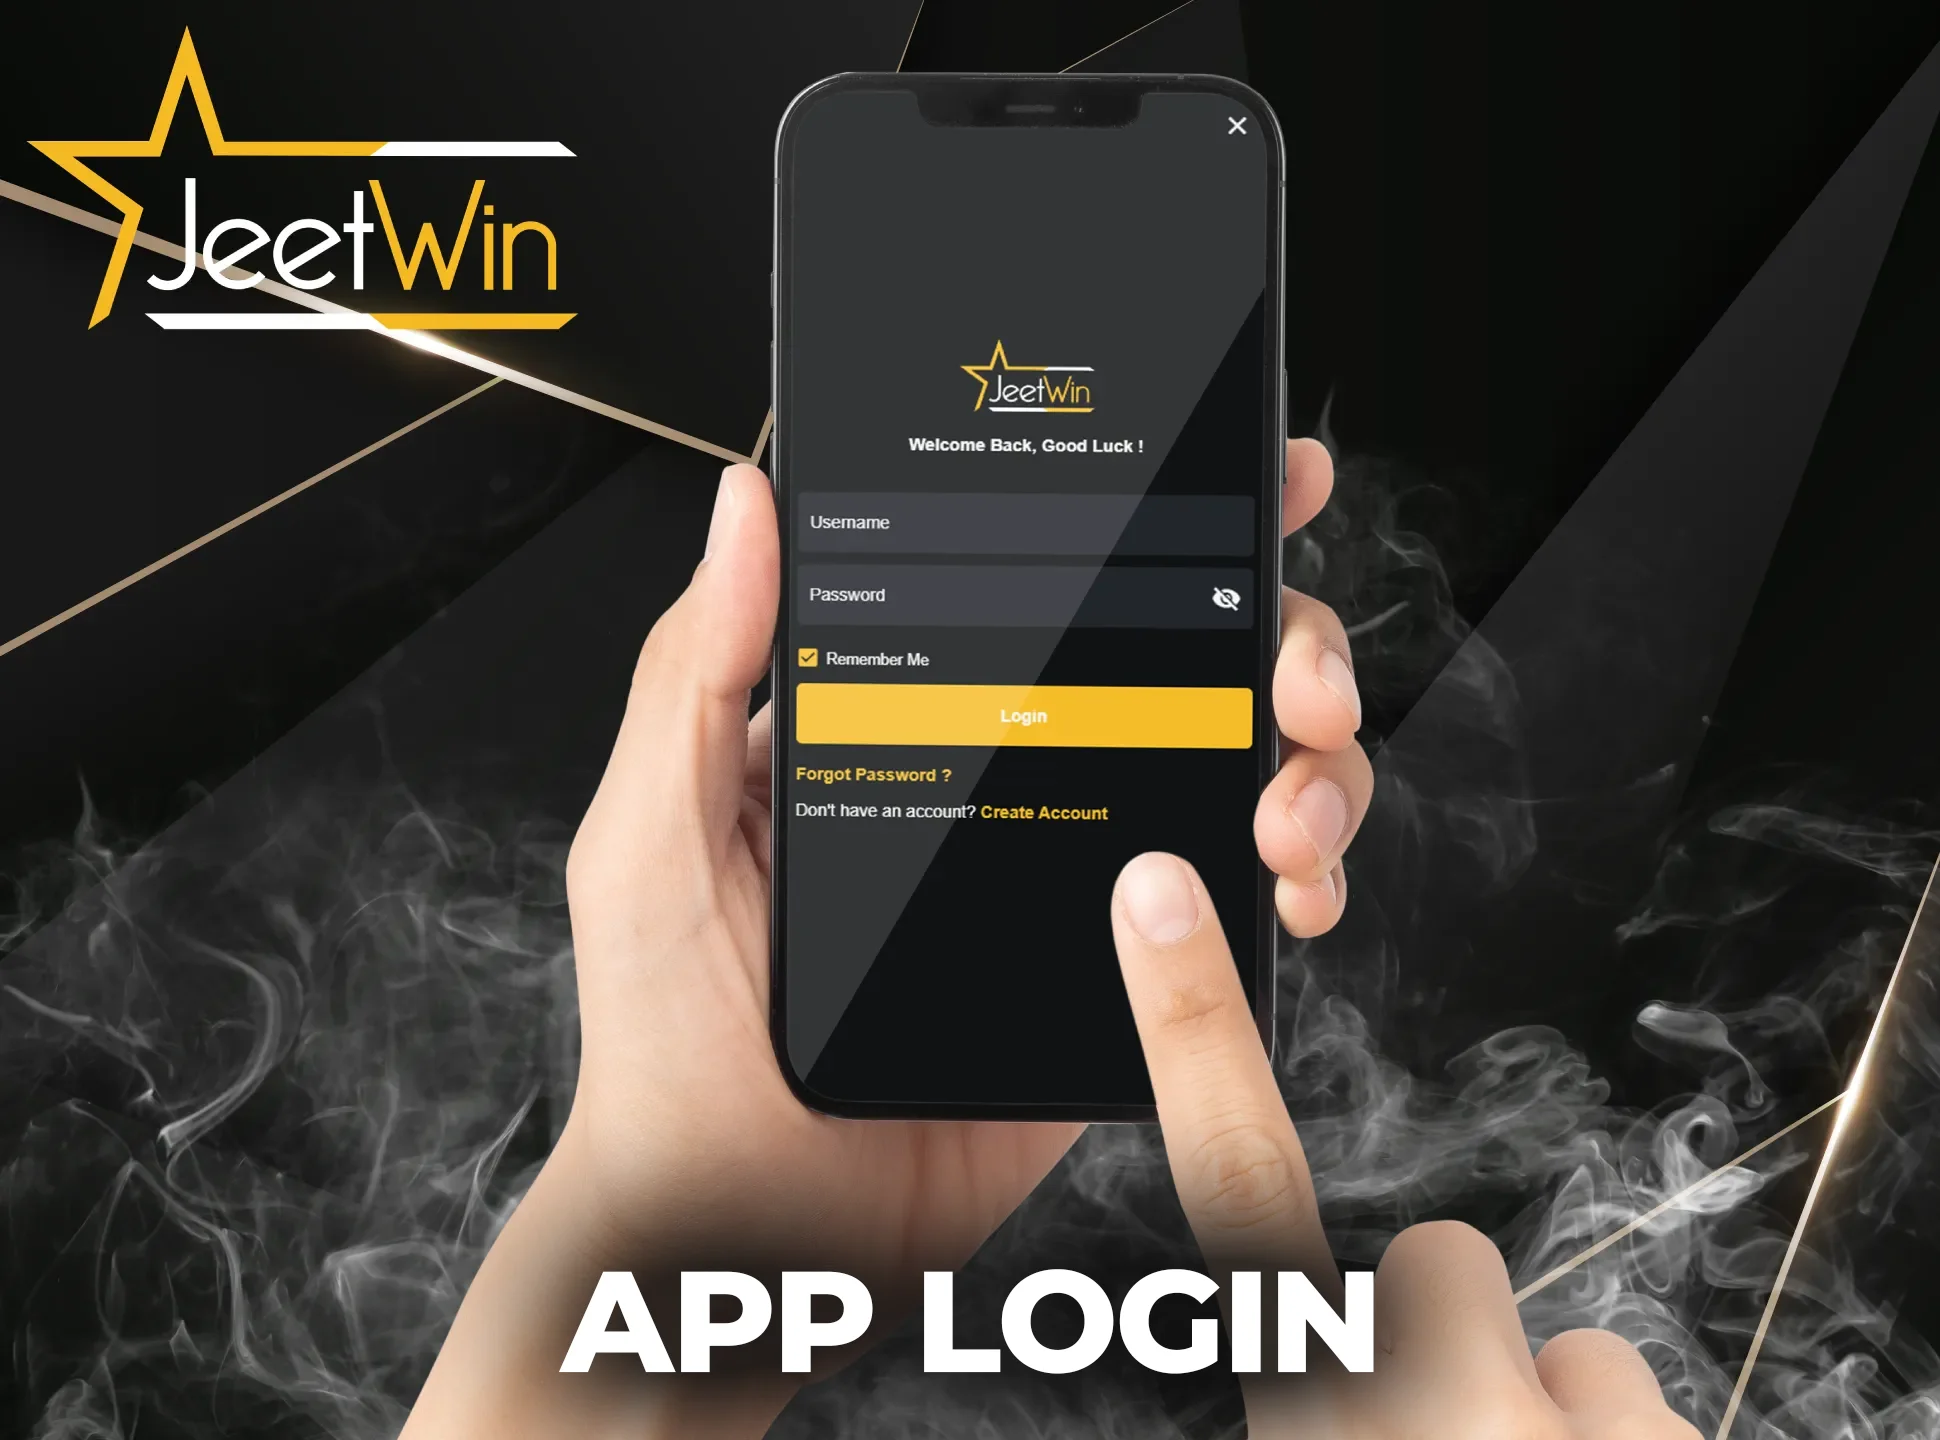 Log in to your account on the JeetWin app.